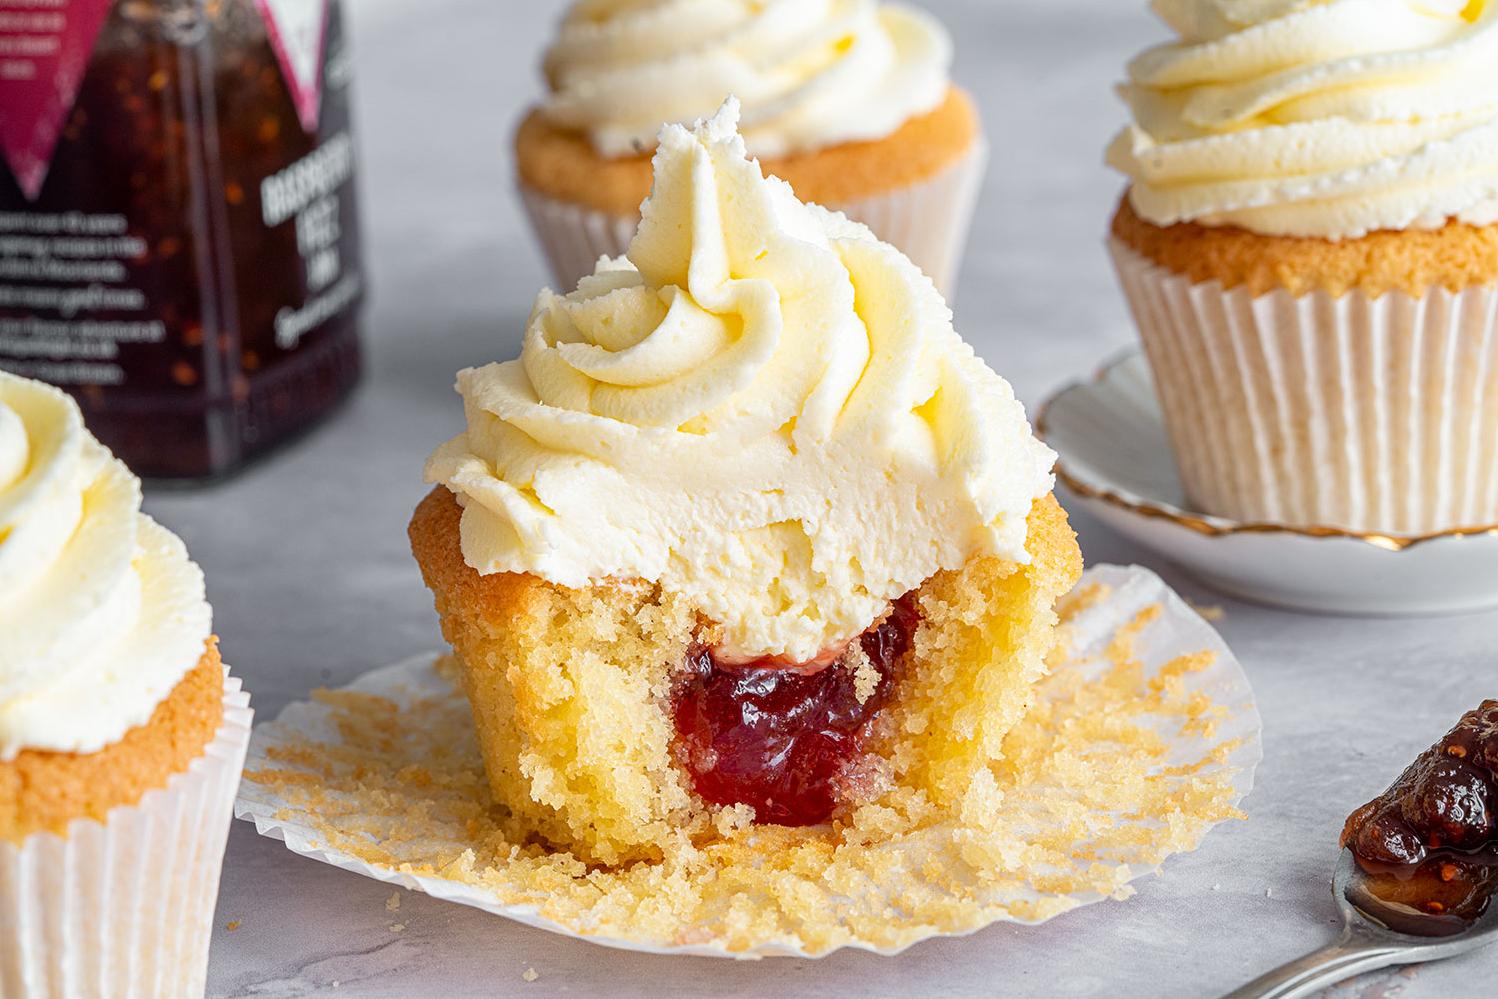  These cupcakes/muffins are free of gluten and dairy, but full of flavor and happiness.